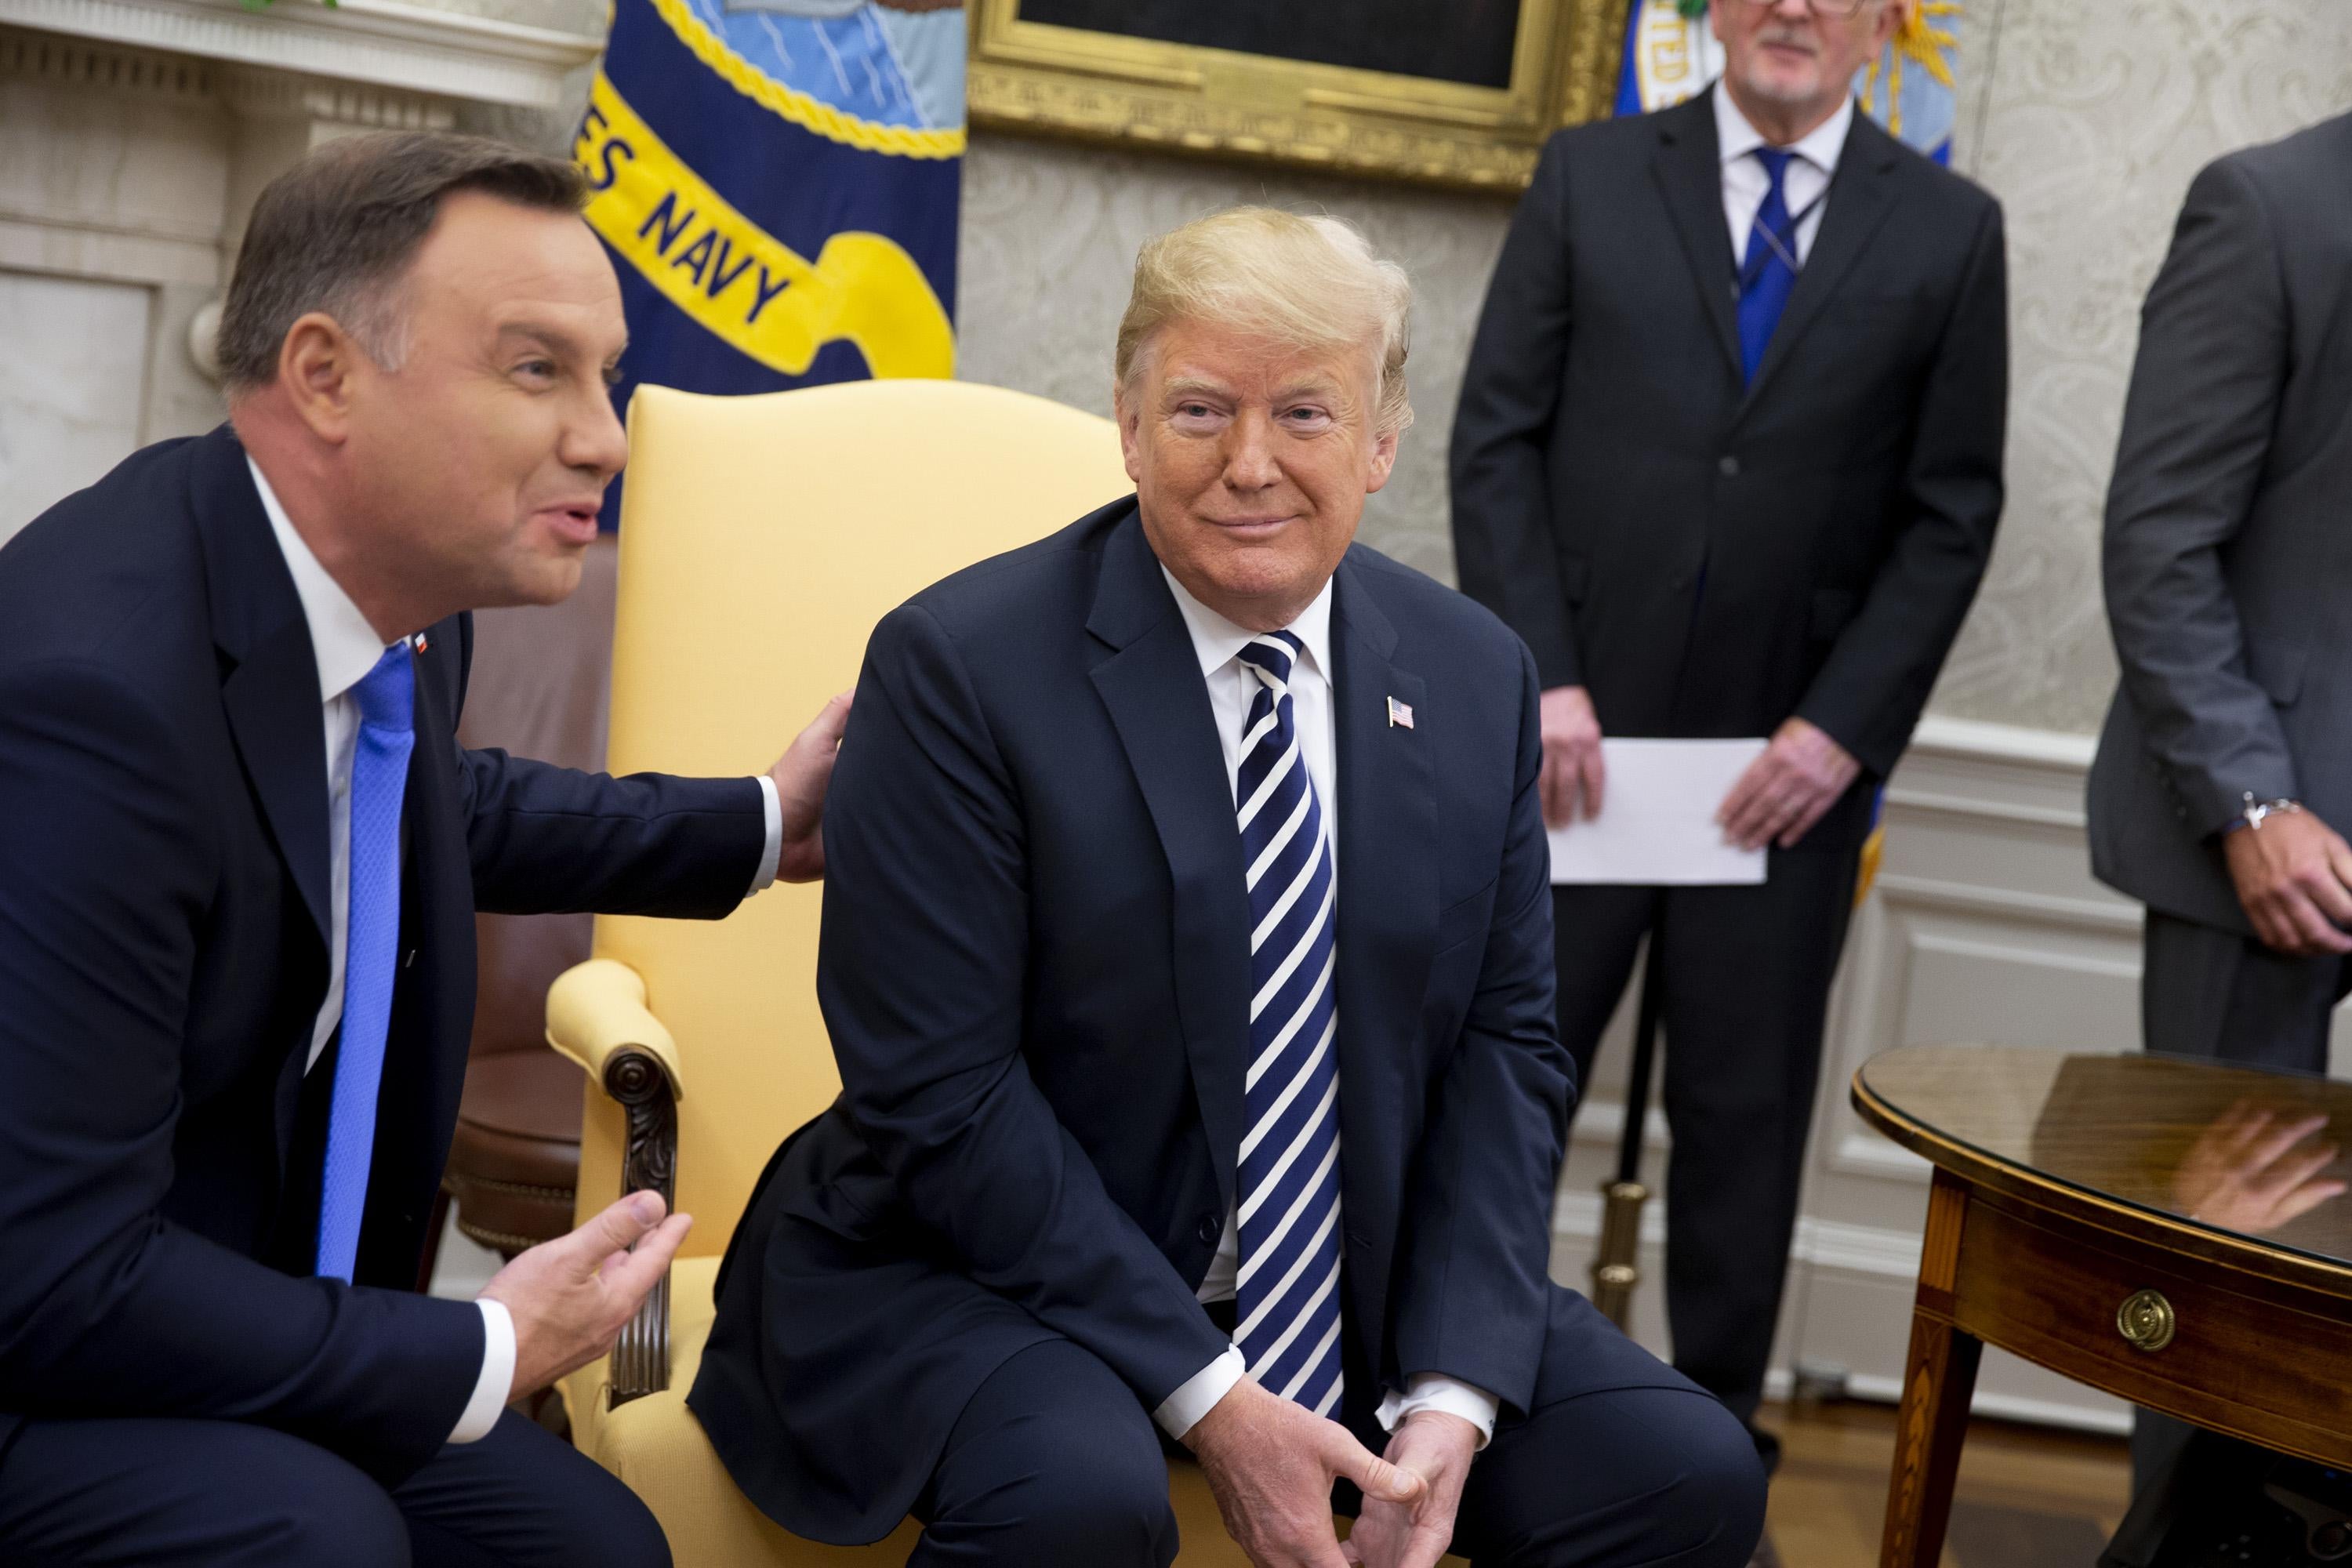  U.S. President Donald Trump and President of Poland Andrzej Duda speak with the media at the oval office in the White House on September 18, 2018. in Washington, DC.